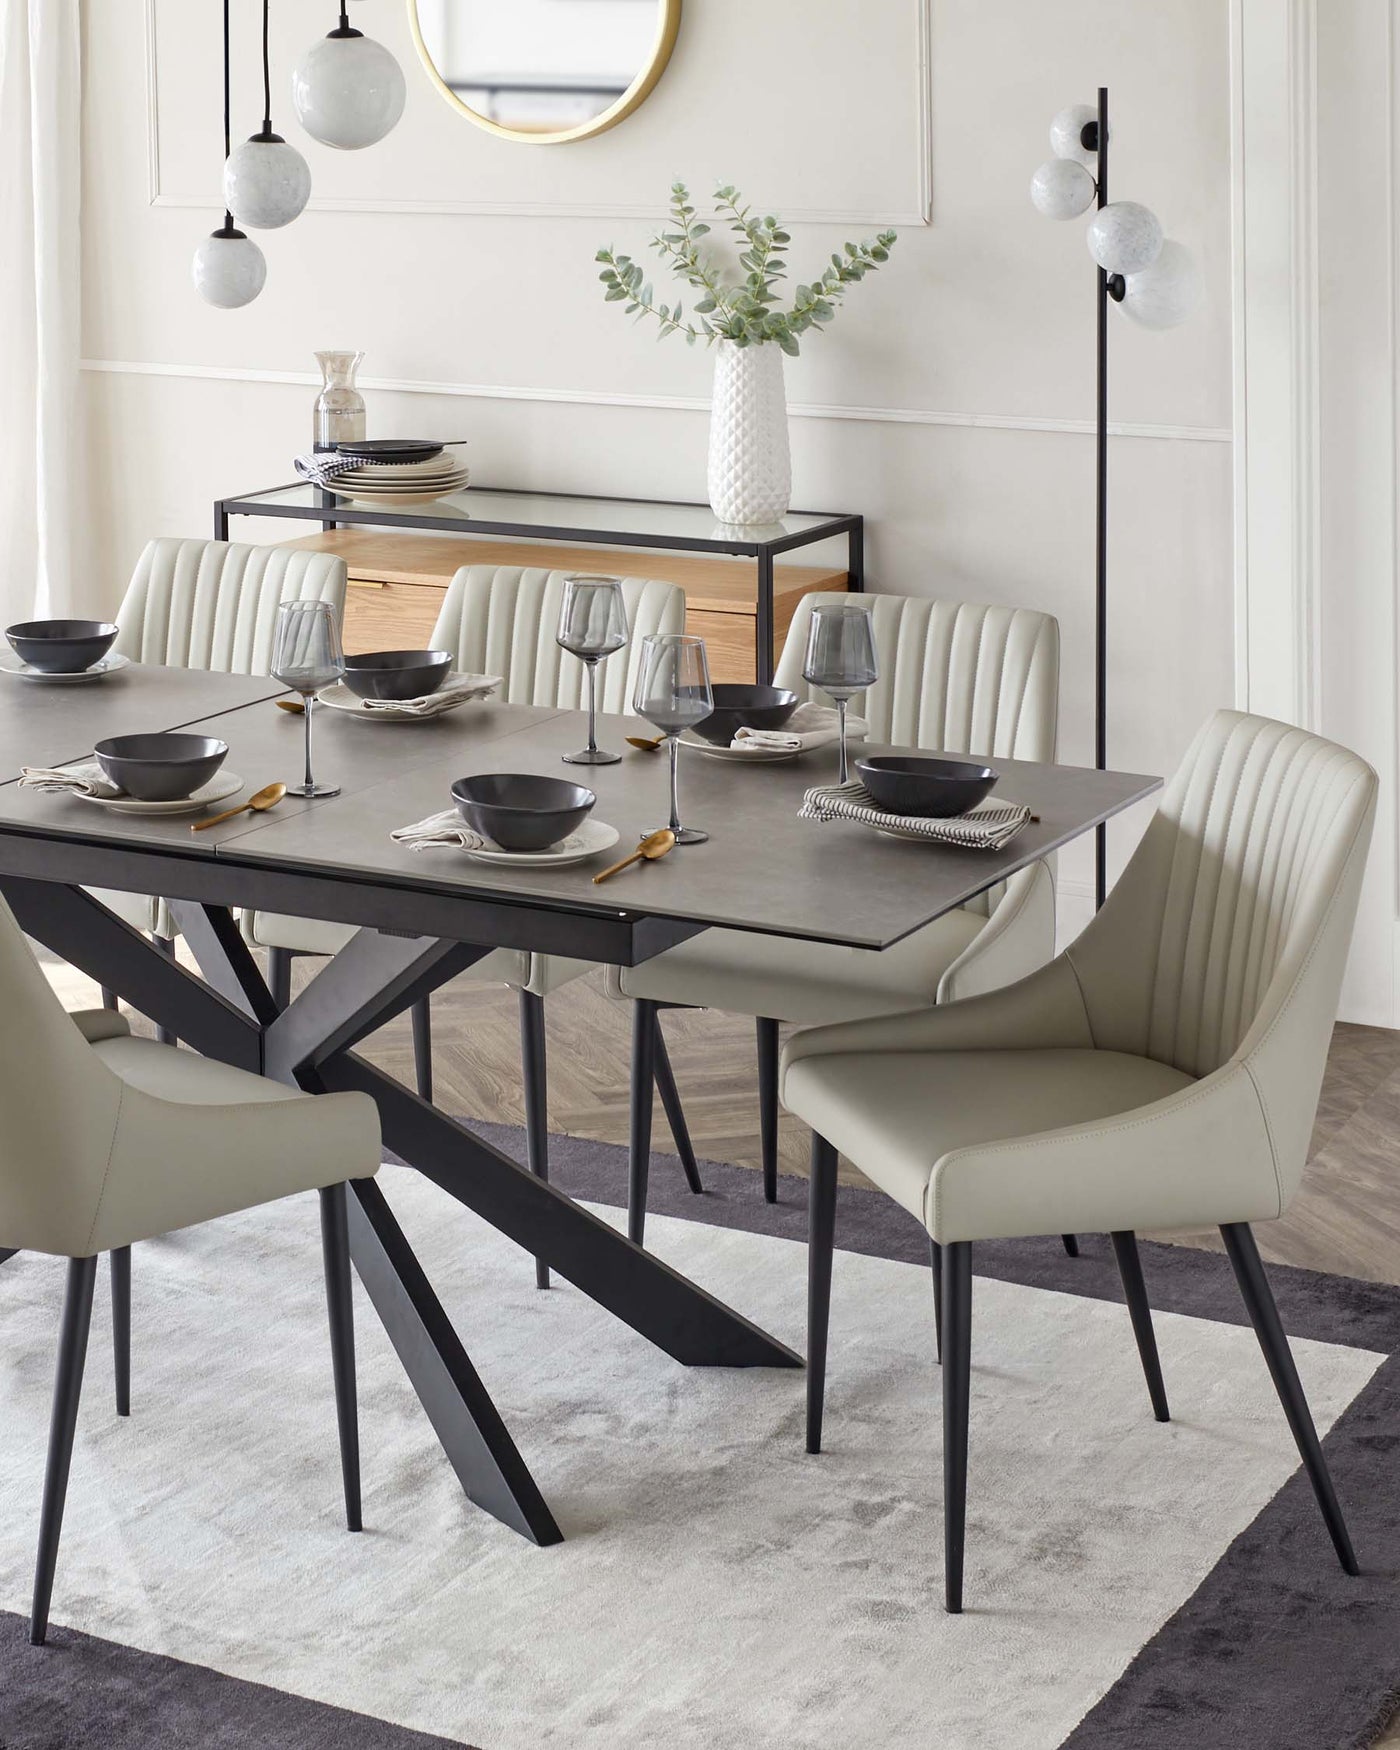 Modern dining room set including a rectangular table with a dark grey surface and angular black metal legs, accompanied by six cream upholstered chairs with vertical stitching and black tapered legs. A sleek black sideboard with a wooden front occupies the background, complemented by a round mirror with a golden frame on the wall above it. The set is arranged on a patterned area rug with grey tones.